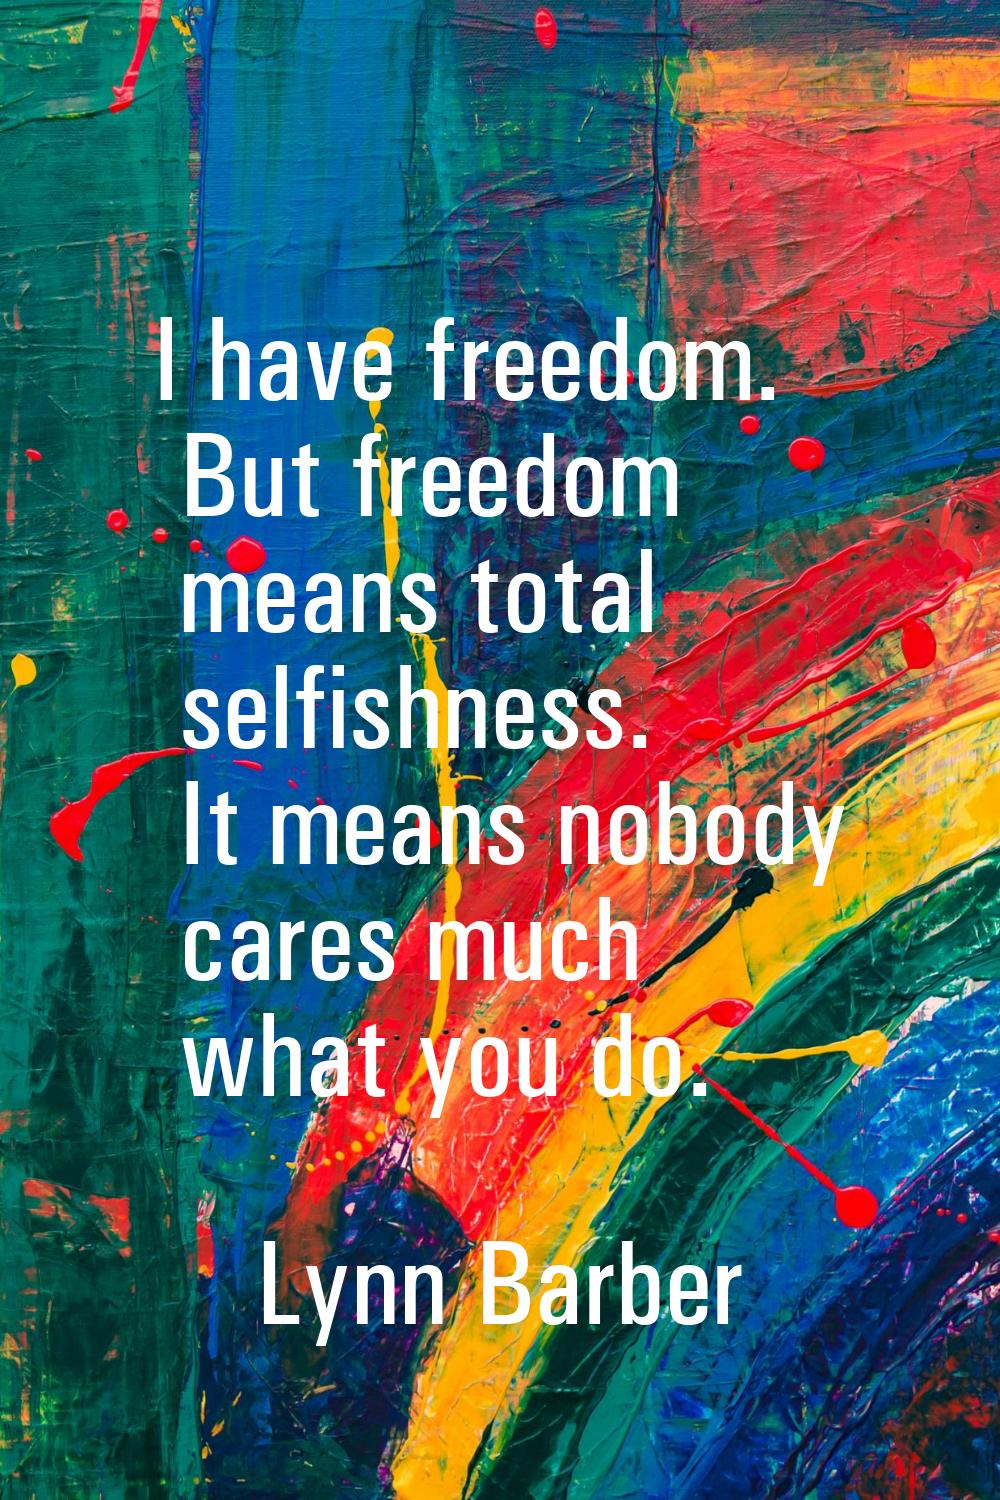 I have freedom. But freedom means total selfishness. It means nobody cares much what you do.